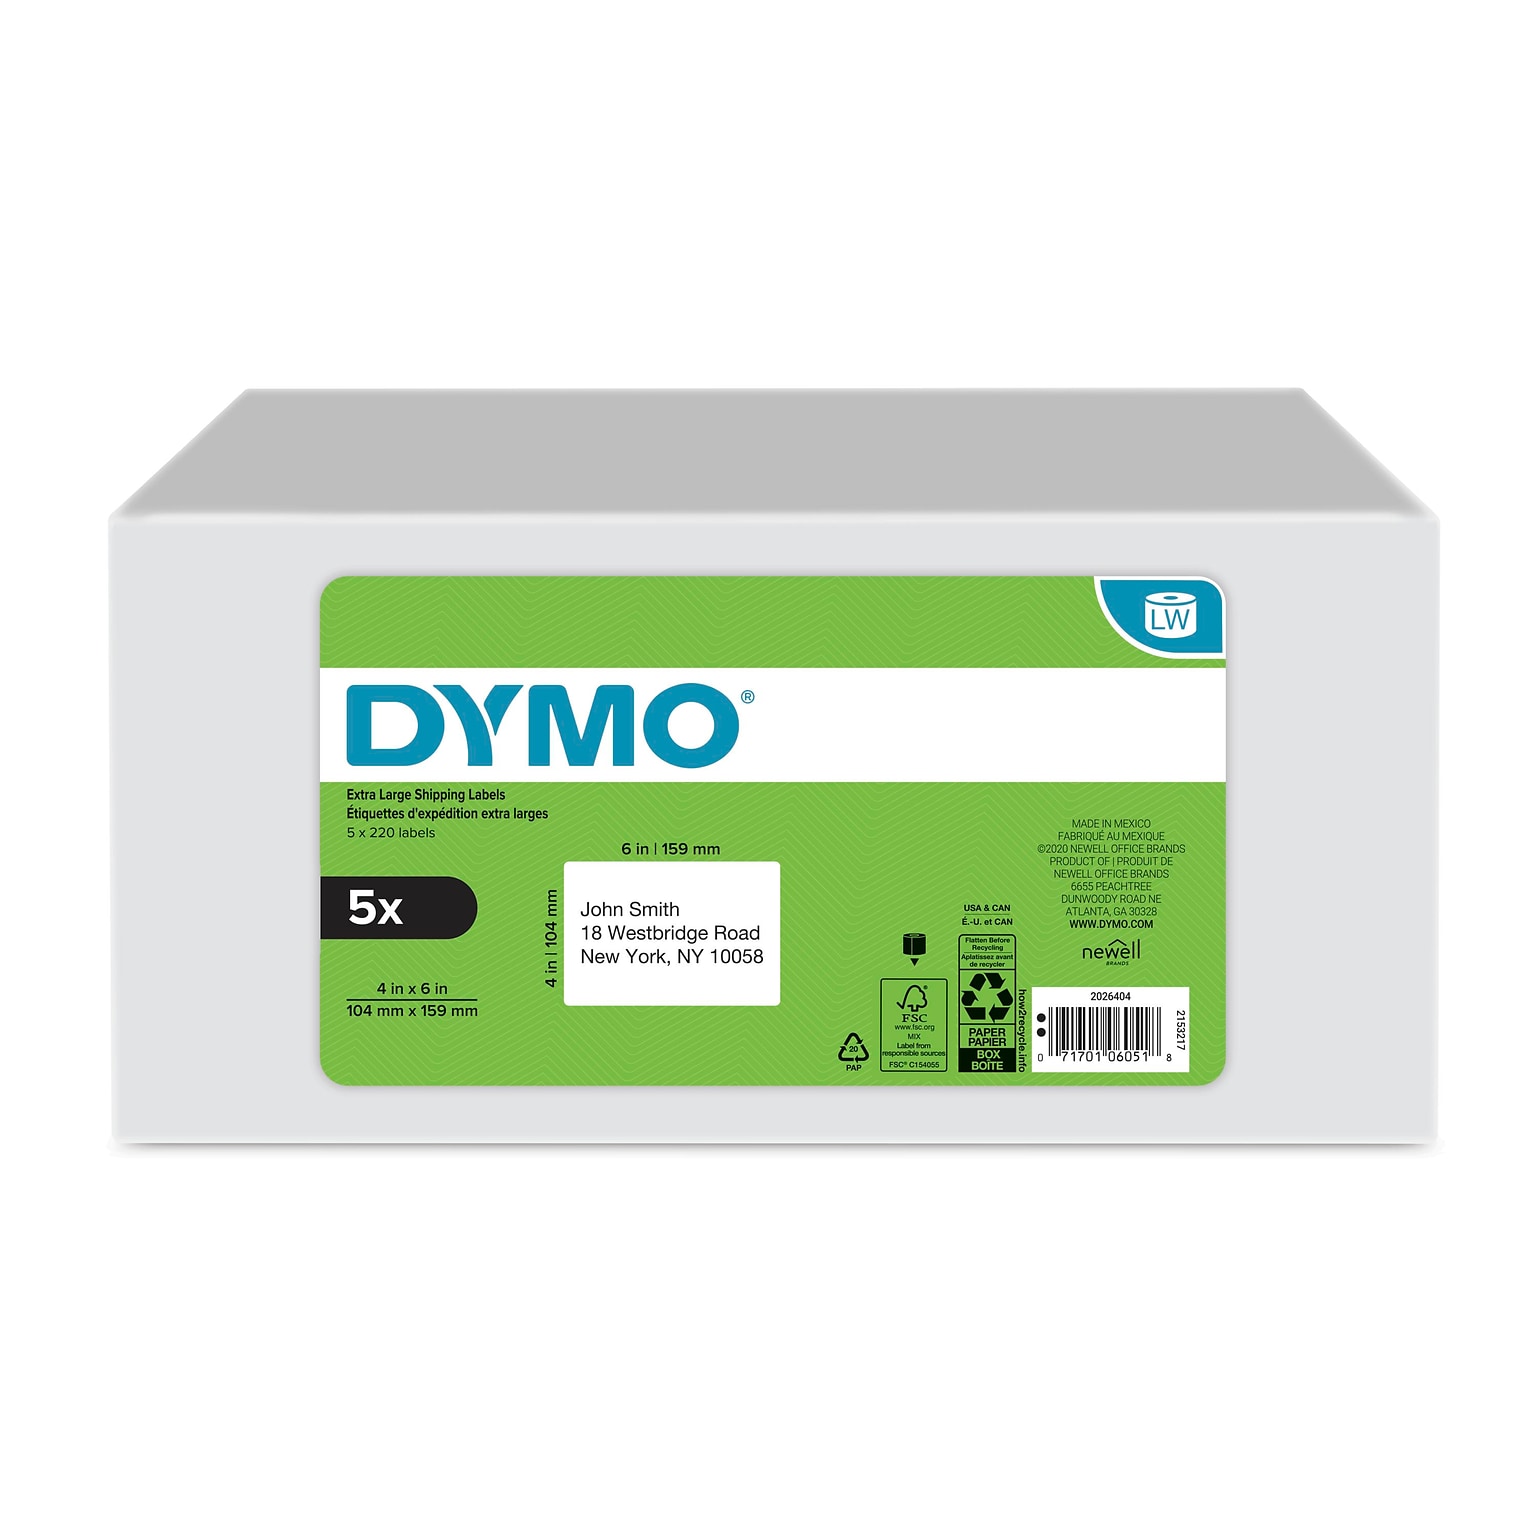 DYMO LabelWriter 2026404 Extra Large Shipping Labels, 4 x 6, Black on White, 220 Labels/Roll, 5 Rolls/Pack (2026404)